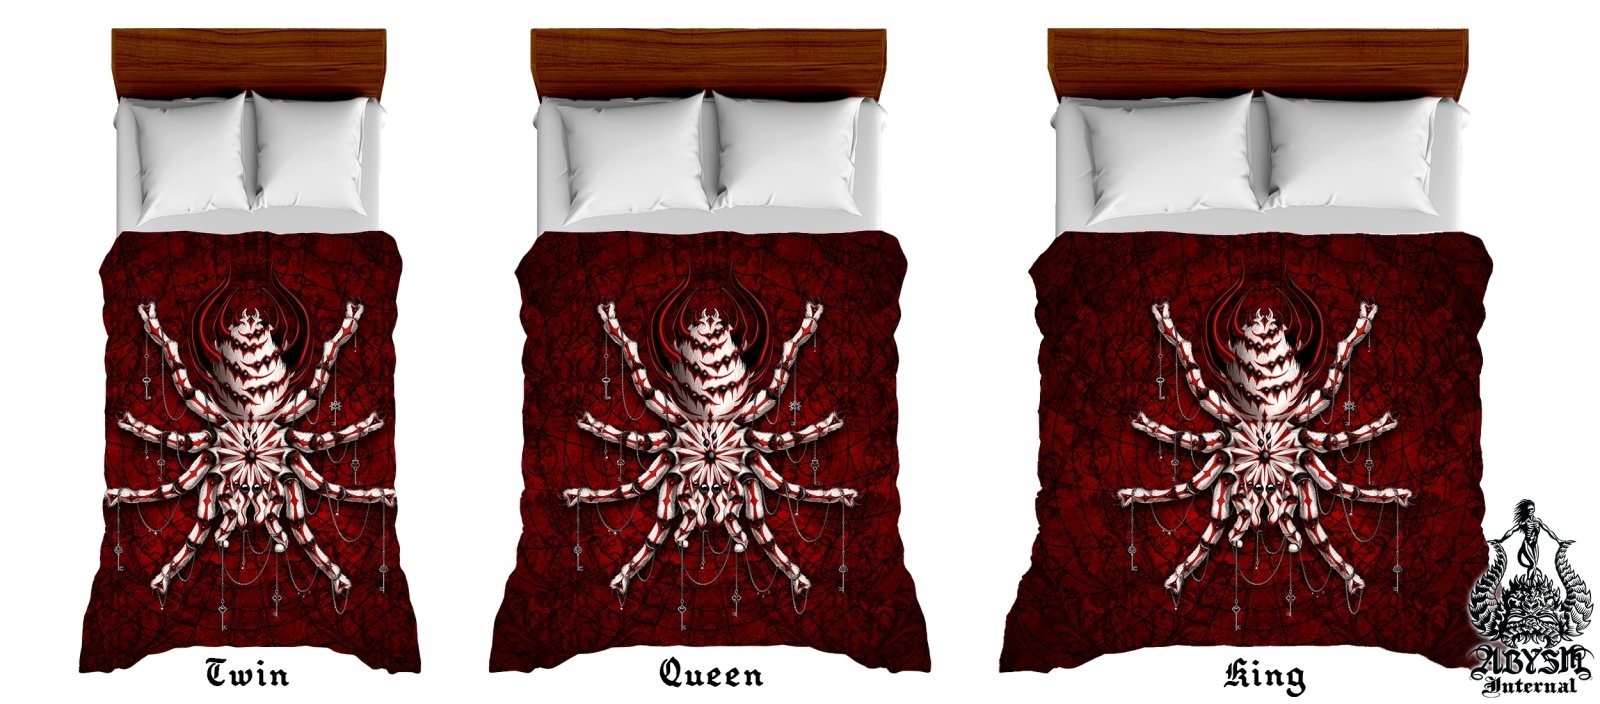 Bloody Spider Bedding Set, Comforter and Duvet, Bed Cover and Bedroom Decor, King, Queen and Twin Size - Tarantula Gothic White - Abysm Internal